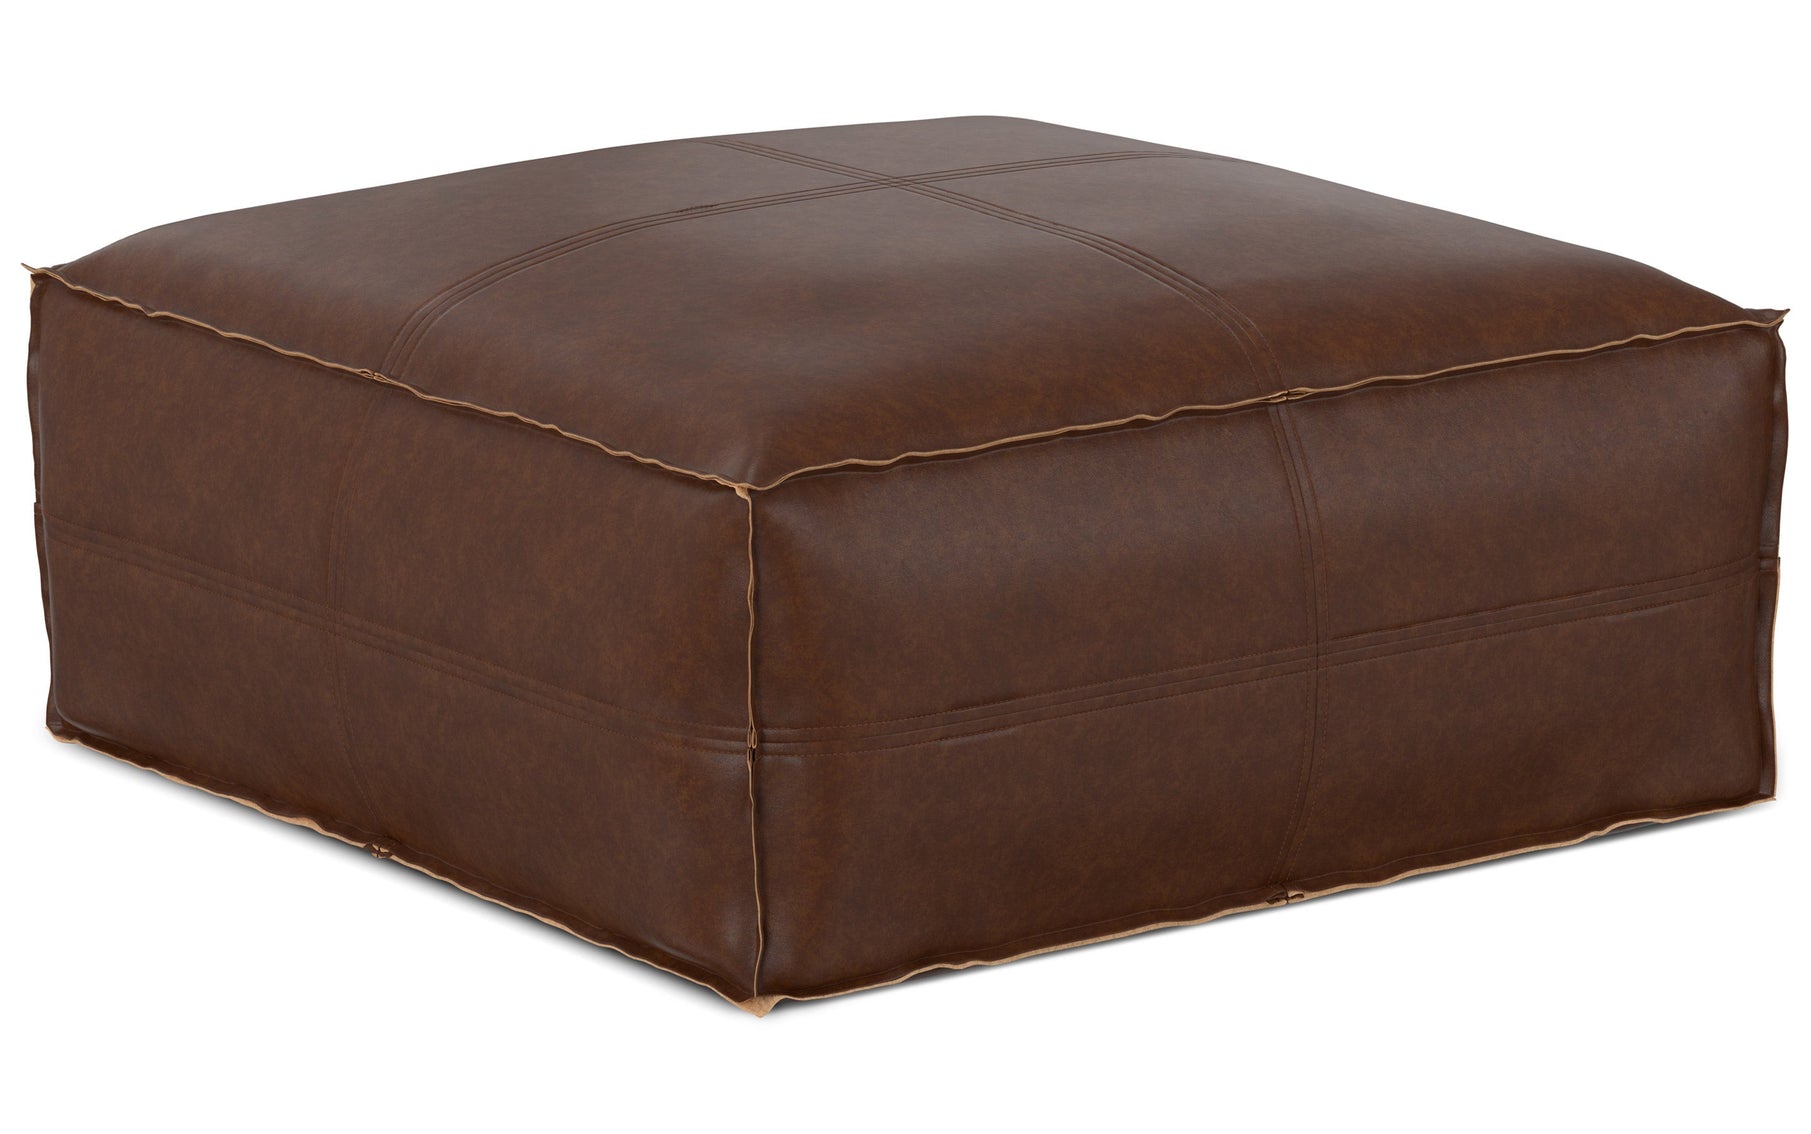 Distressed Dark Brown | Brody Large Square Coffee Table Pouf